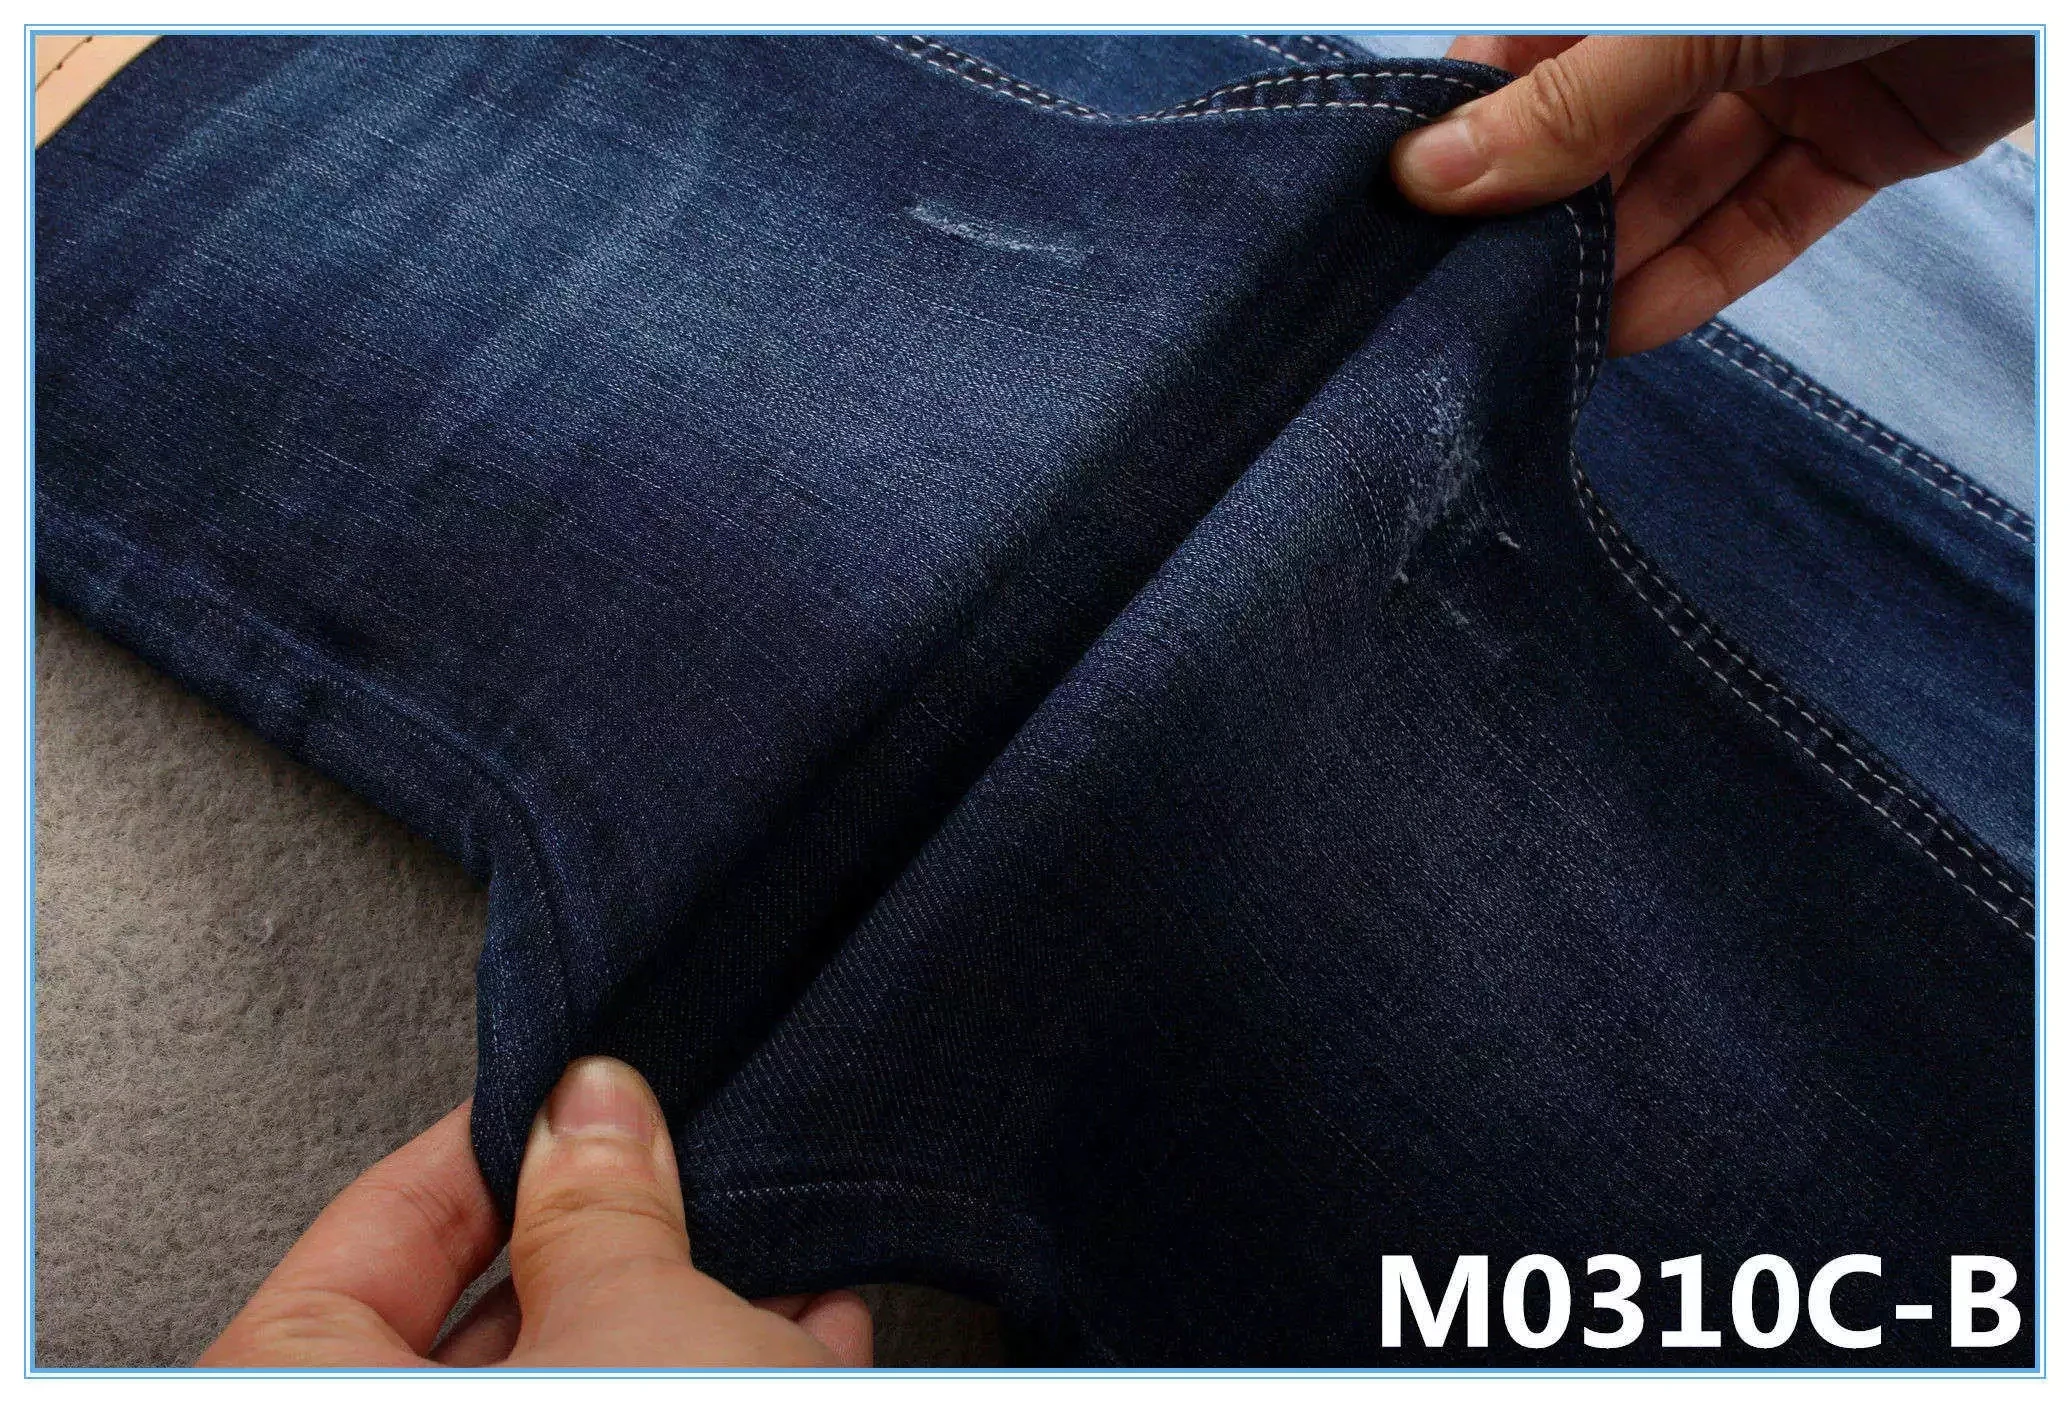 Performance Fabric Remy Denim 409428 - My Fabric Connection